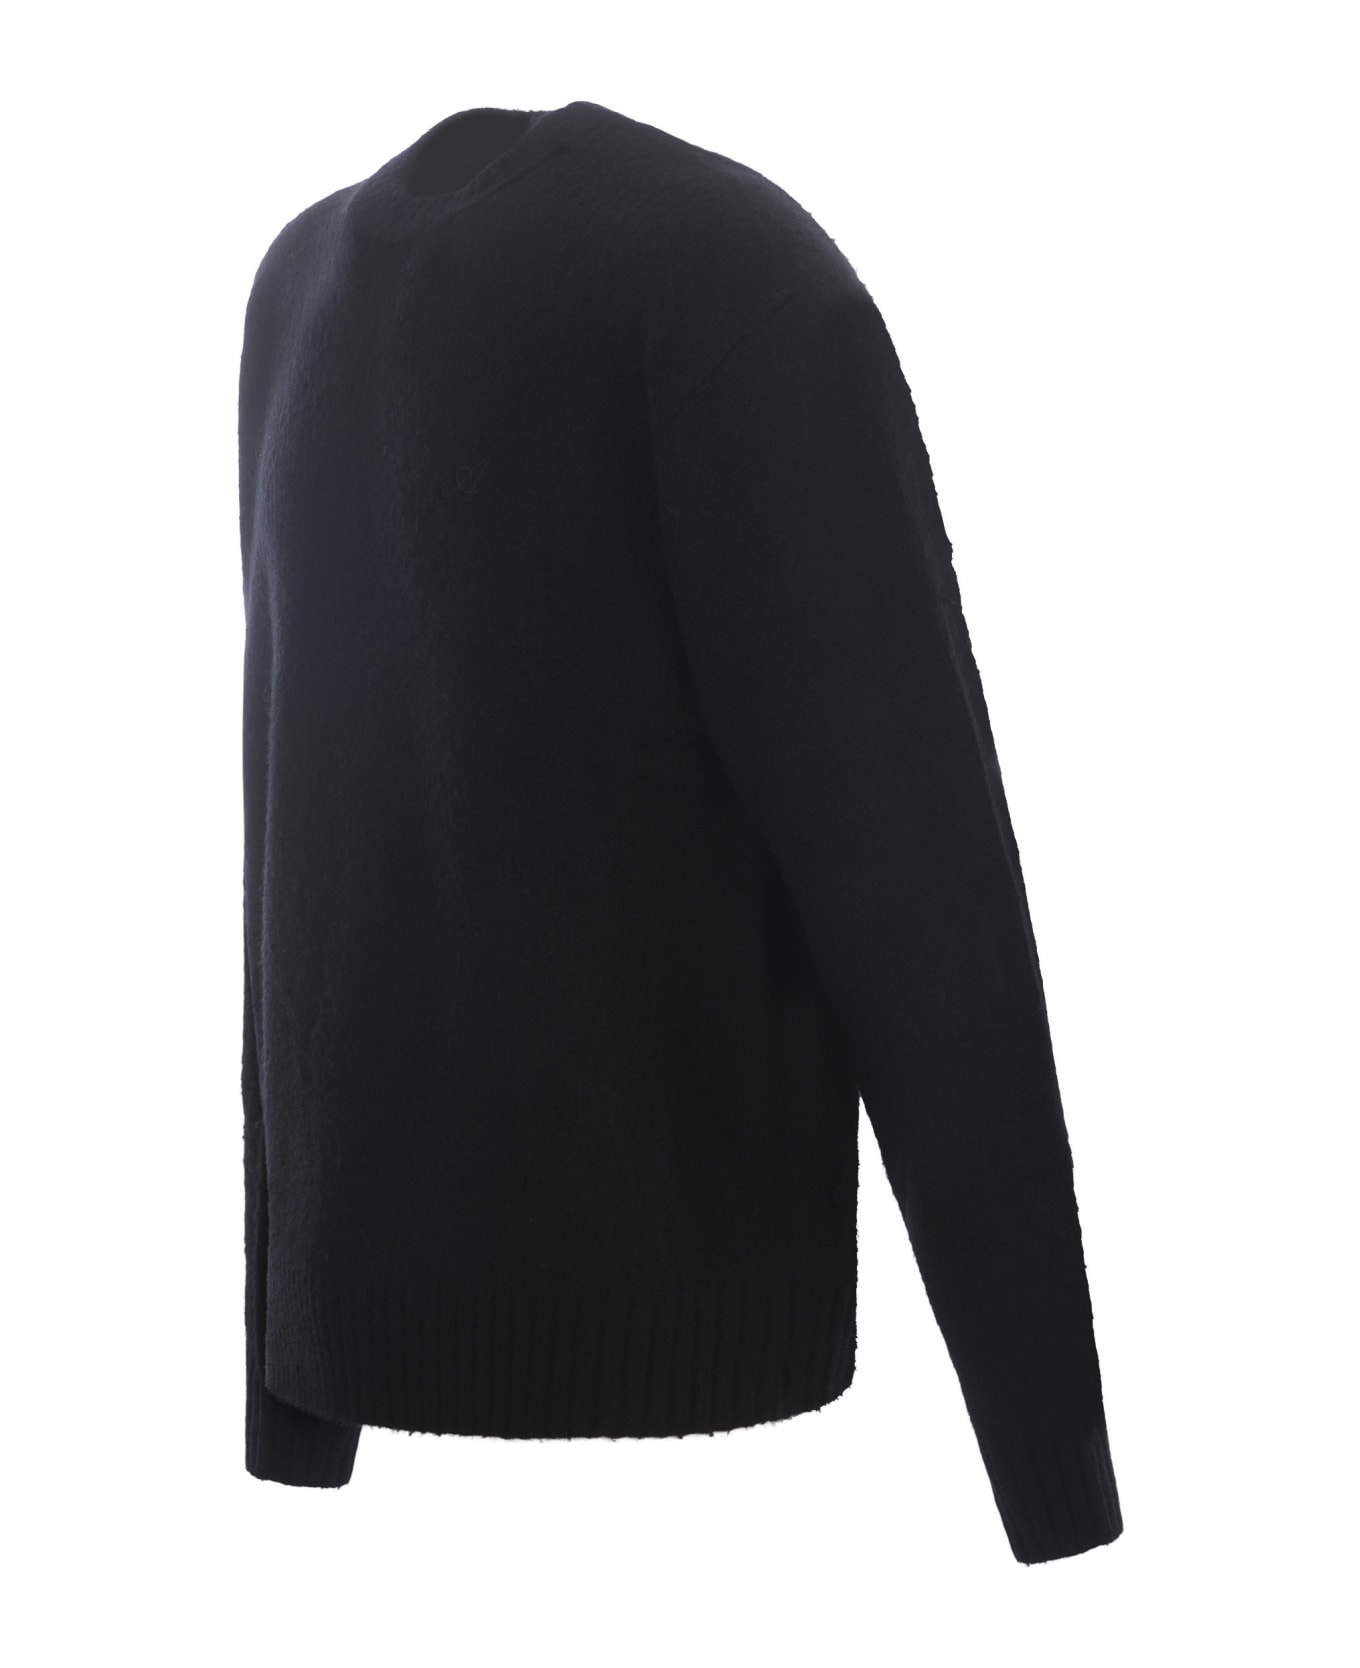 Axel Arigato Sweater Axel Arigato "clay" In Wool And Cashmere Blend - Nero